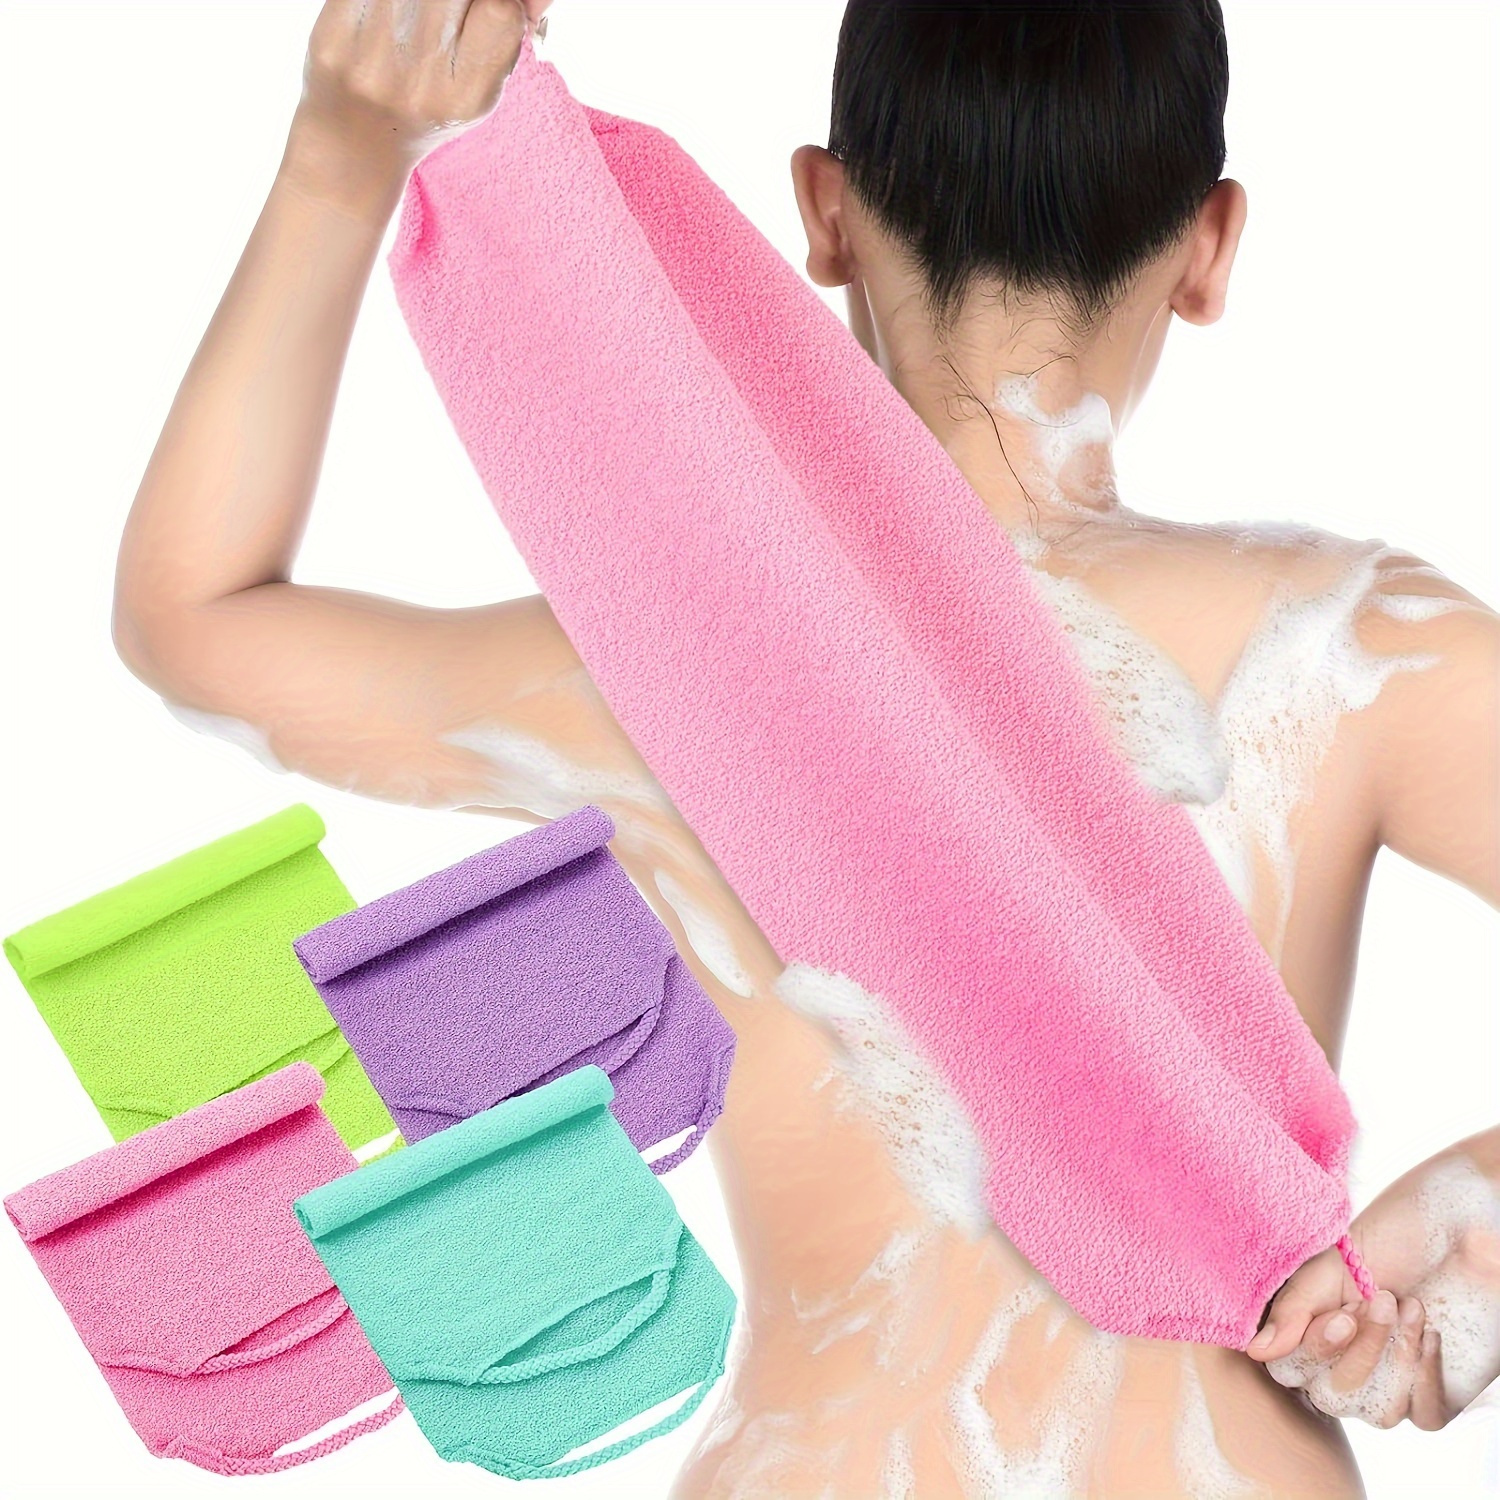 

4-pack Stretchable Nylon Exfoliating Back Scrubber Gloves, Dual-layer Body Scrubbing Cloth With Handle For Shower, Skin Cleansing And Massage, Quick Dry Washcloth For Men And Women